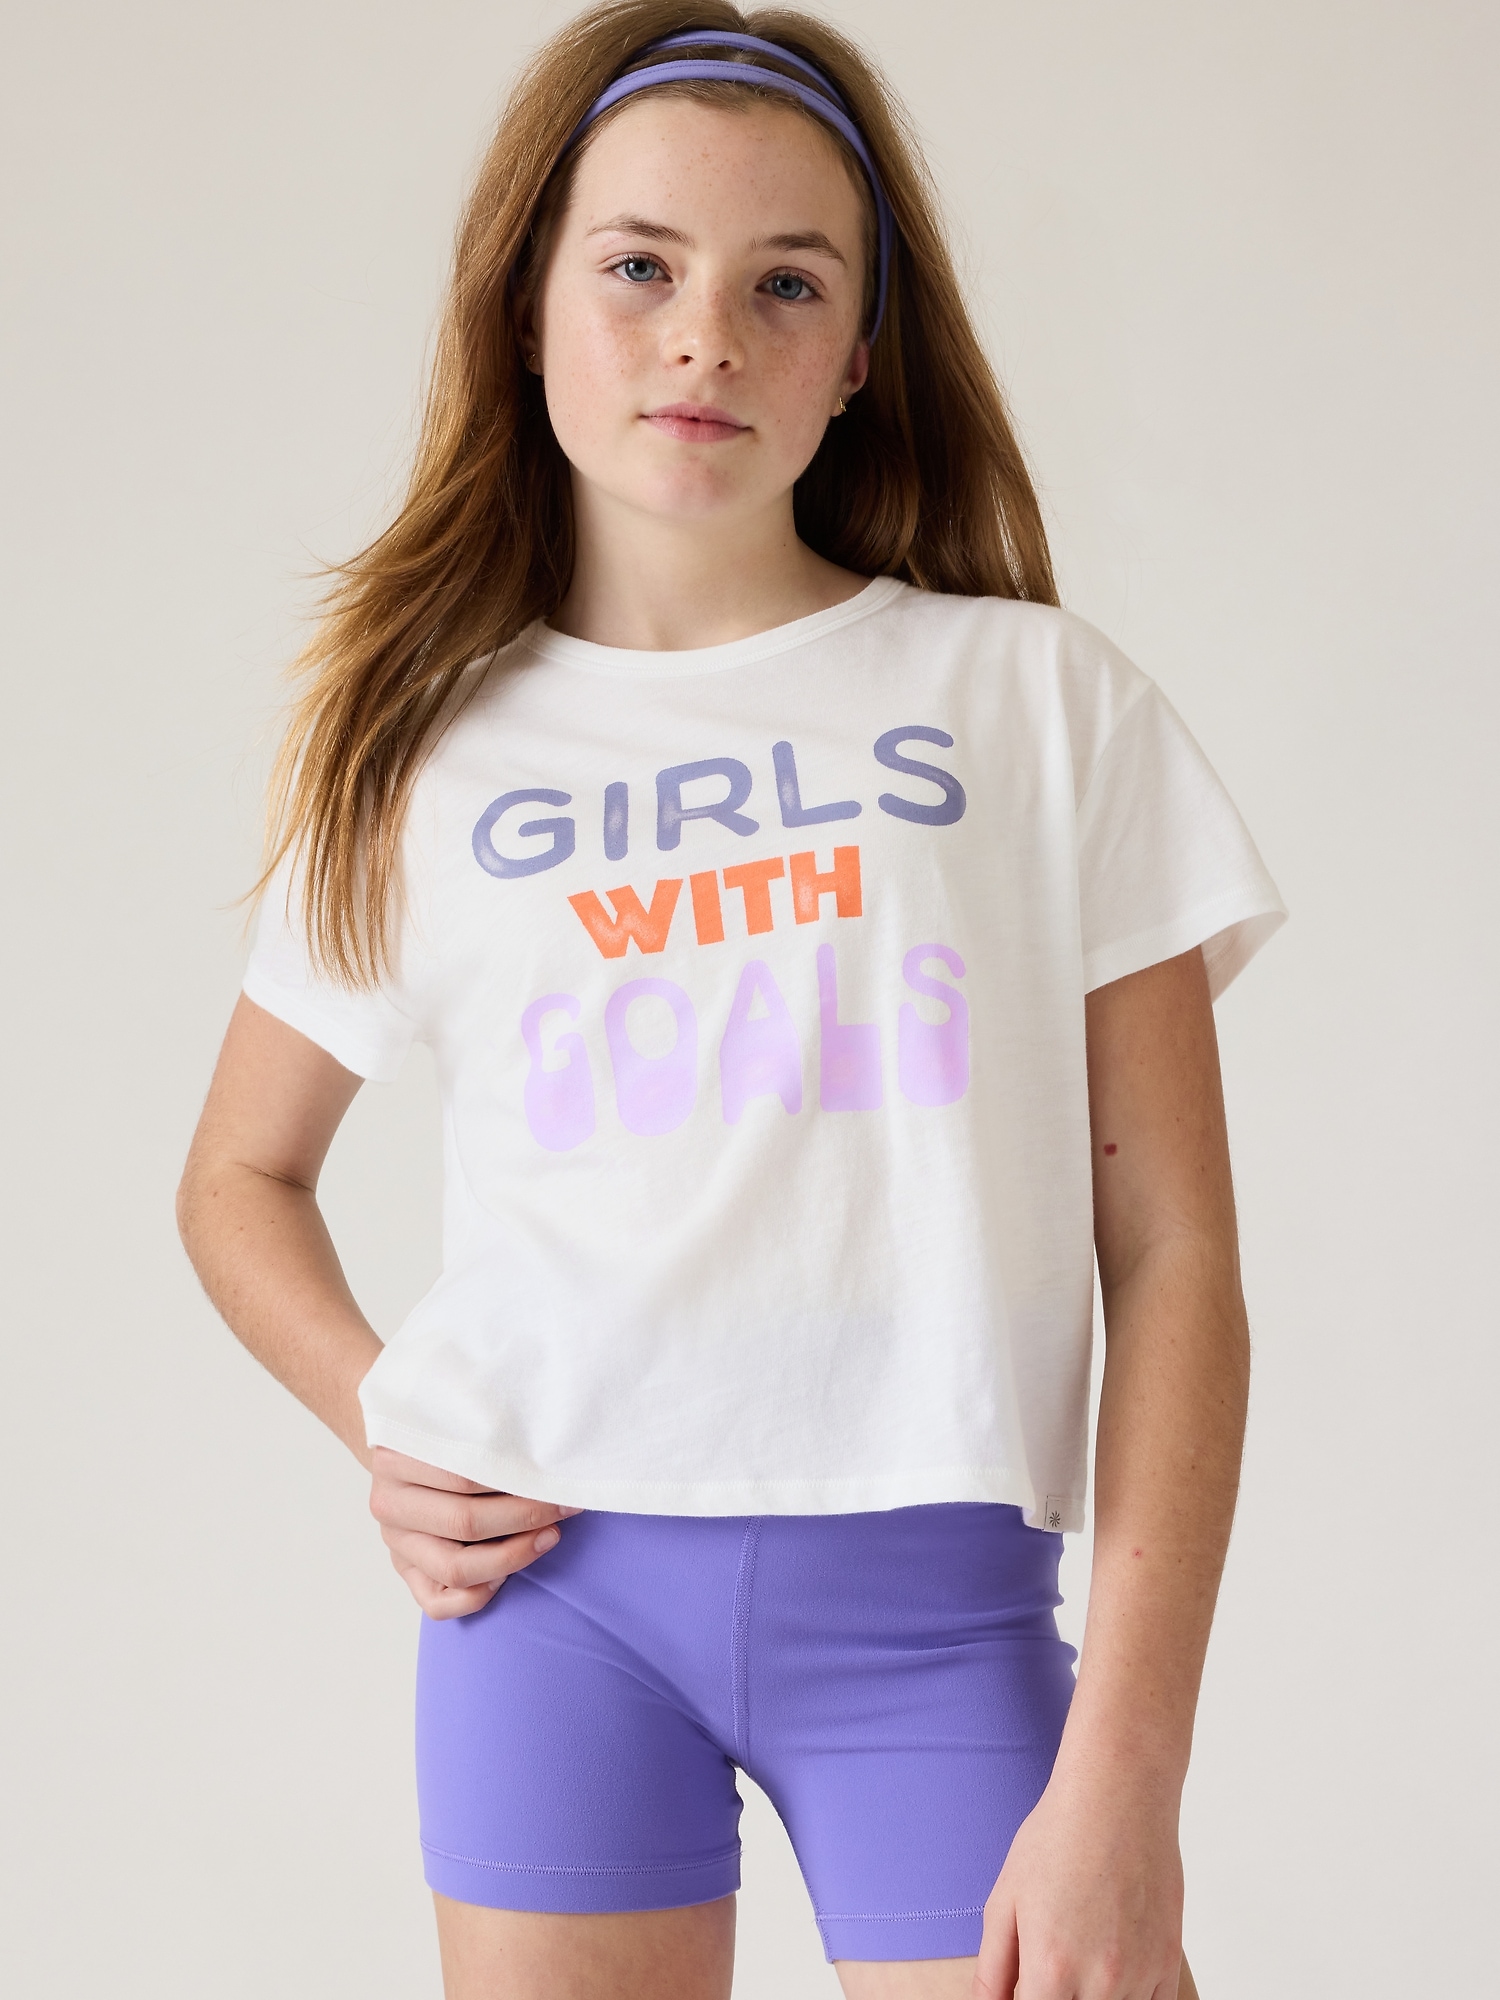 Athleta Multi-Color Tops & T-Shirts for Girls Sizes (4+)